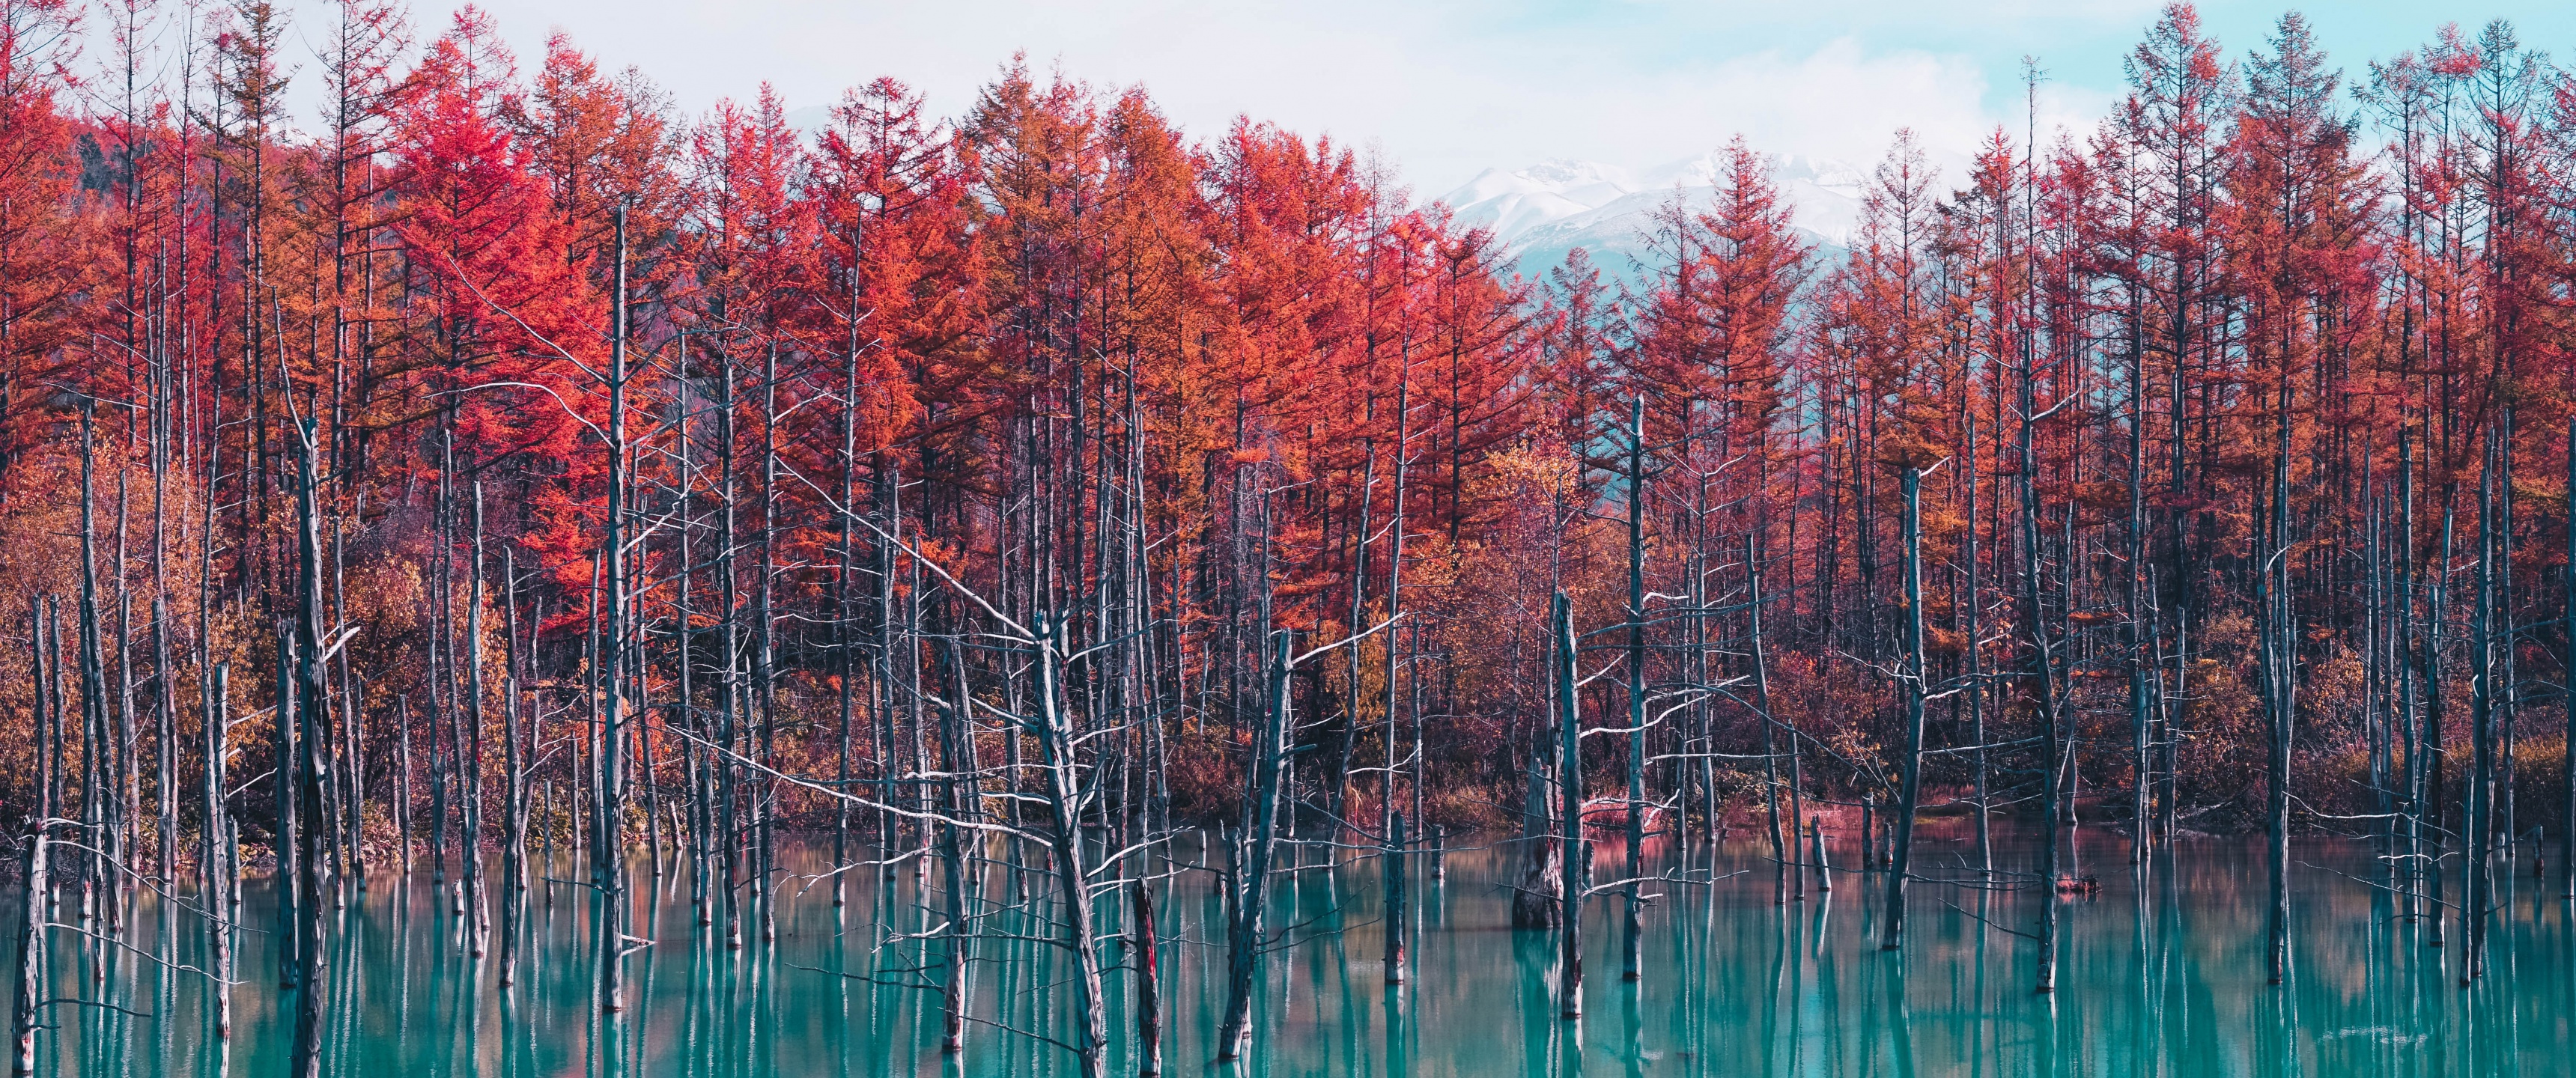 A forest of trees with red leaves in front of a lake - Nature